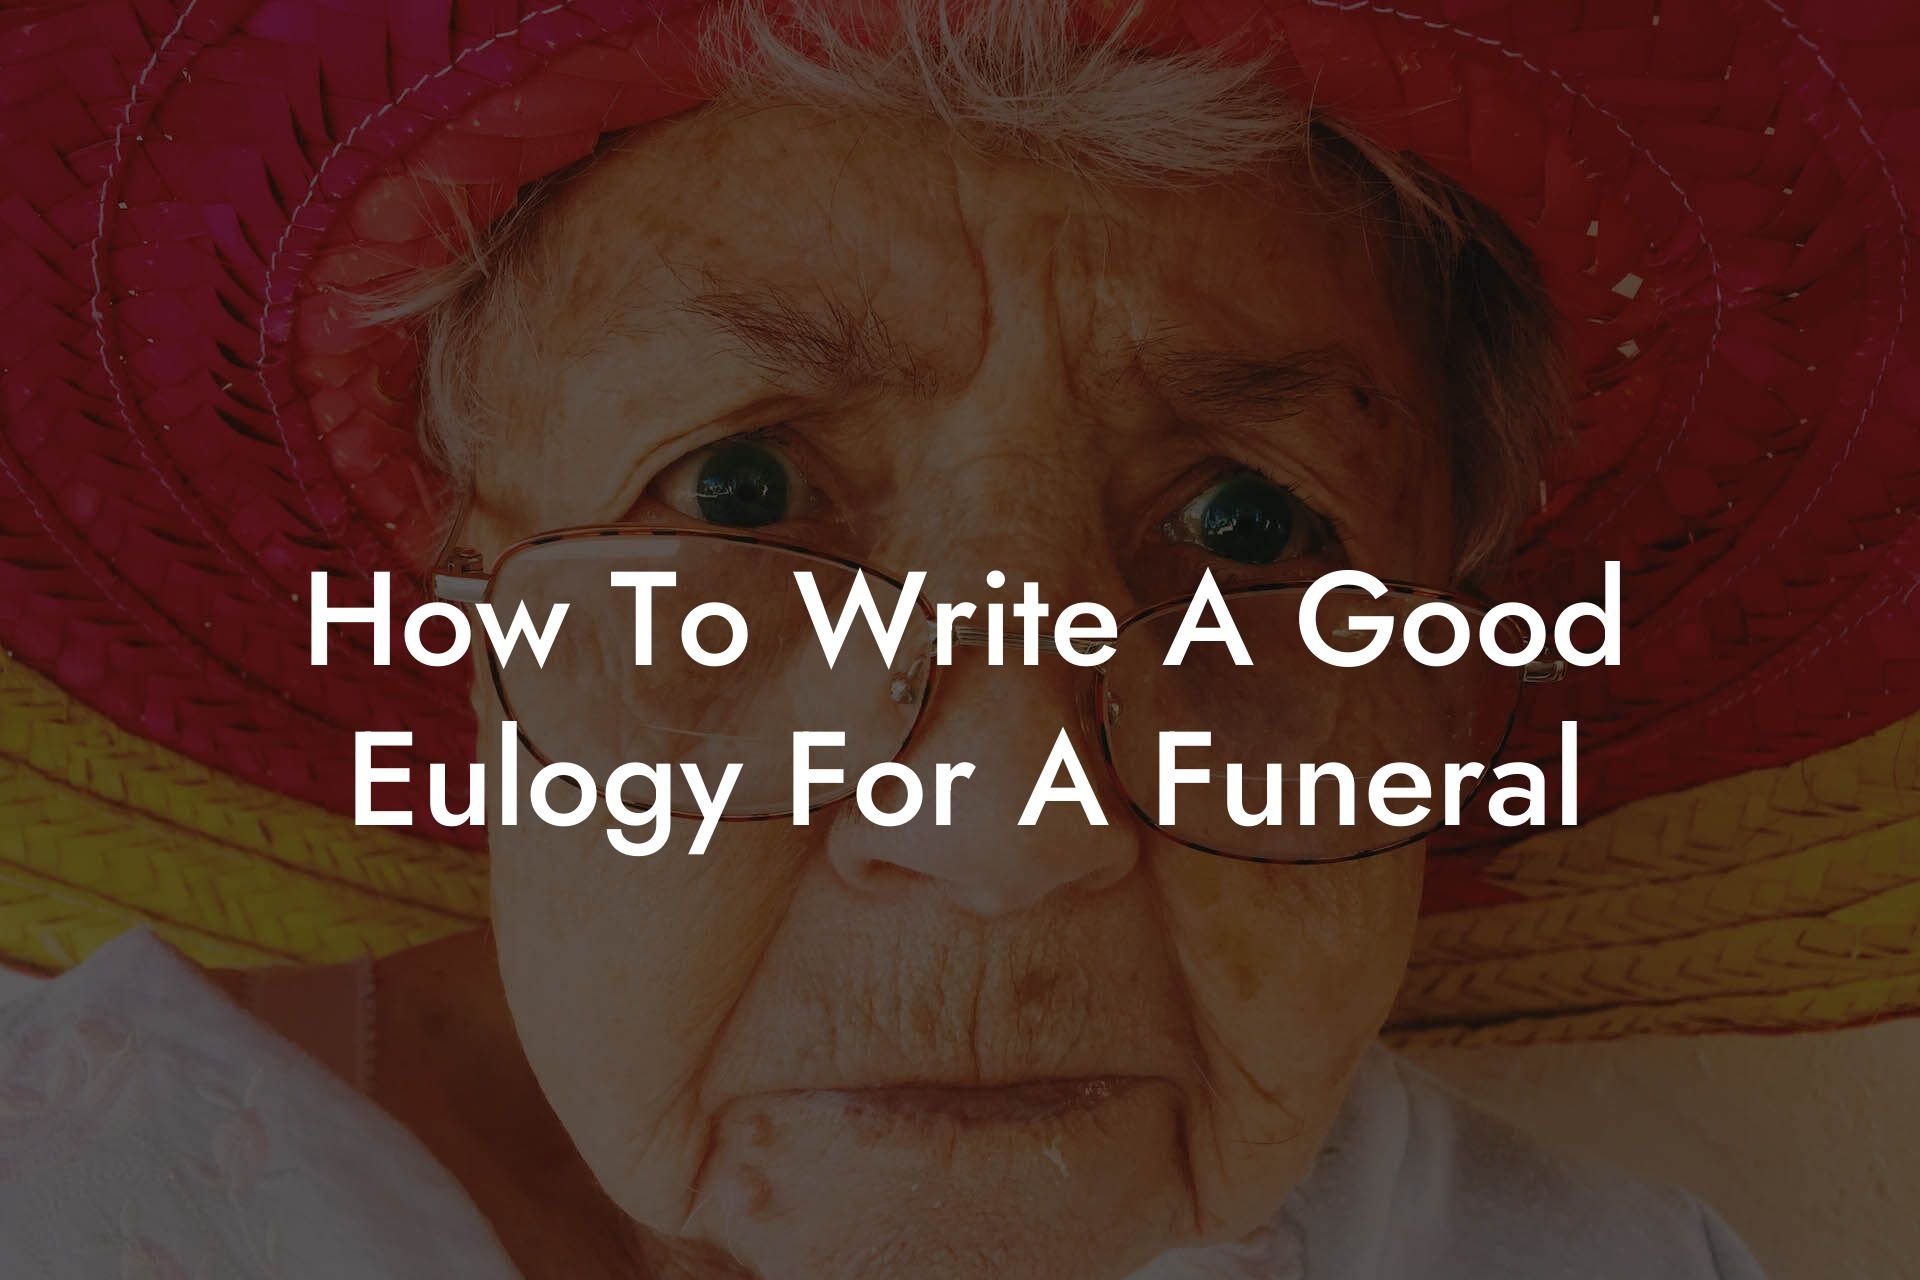 How To Write A Good Eulogy For A Funeral